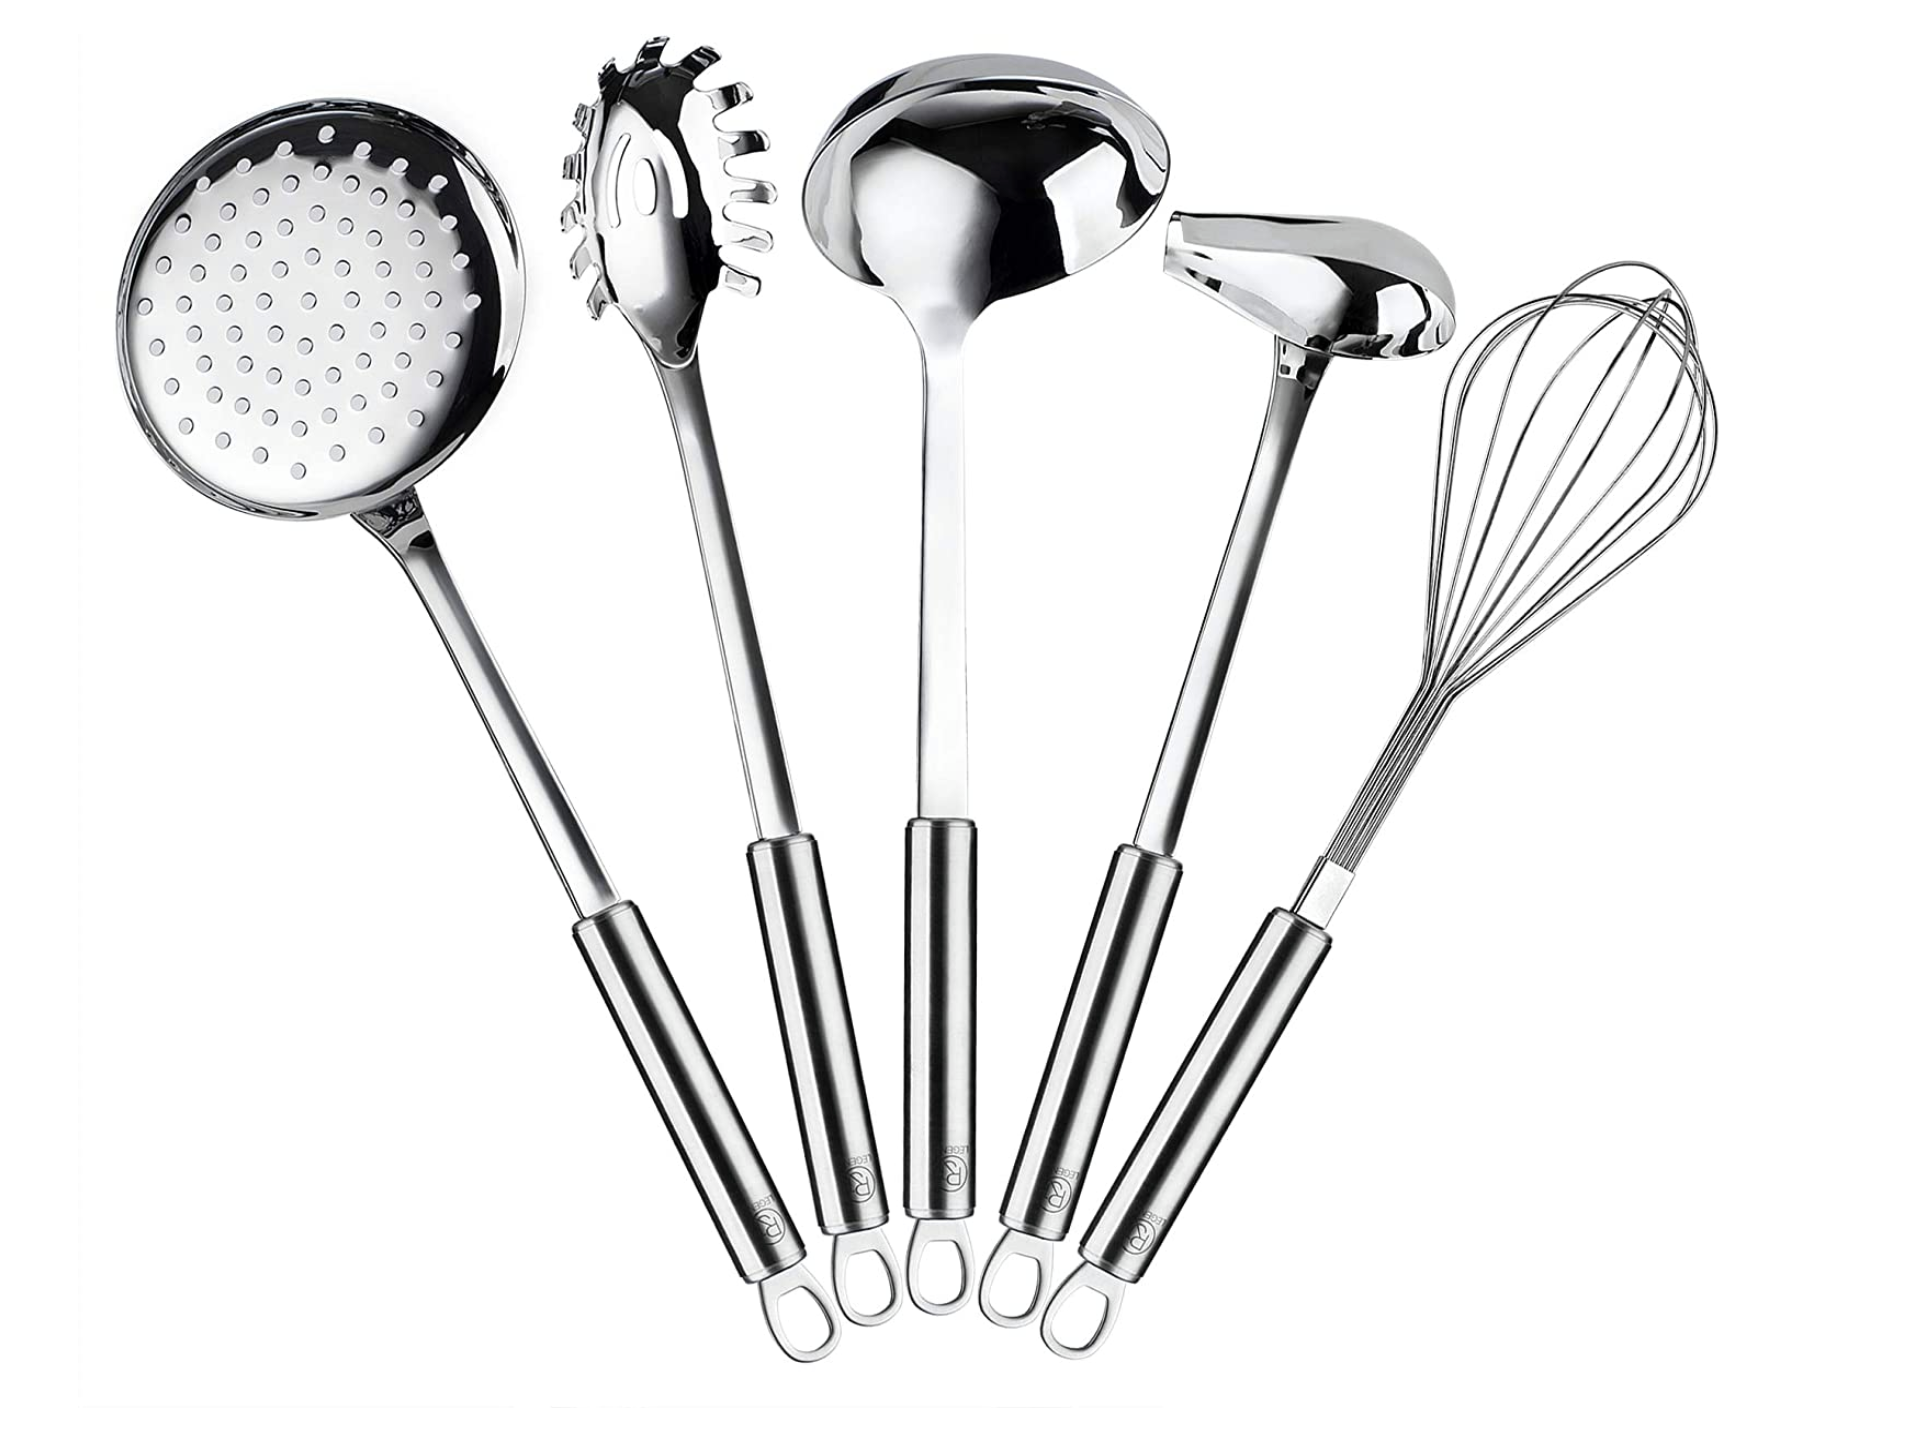 304 Stainless Steel Kitchen Utensils Set - 8 PCS All Metal Cooking Tools  with Spatula, Solid Spoon, Slotted Spoon, Ladle, Skimmer Slotted Spoon